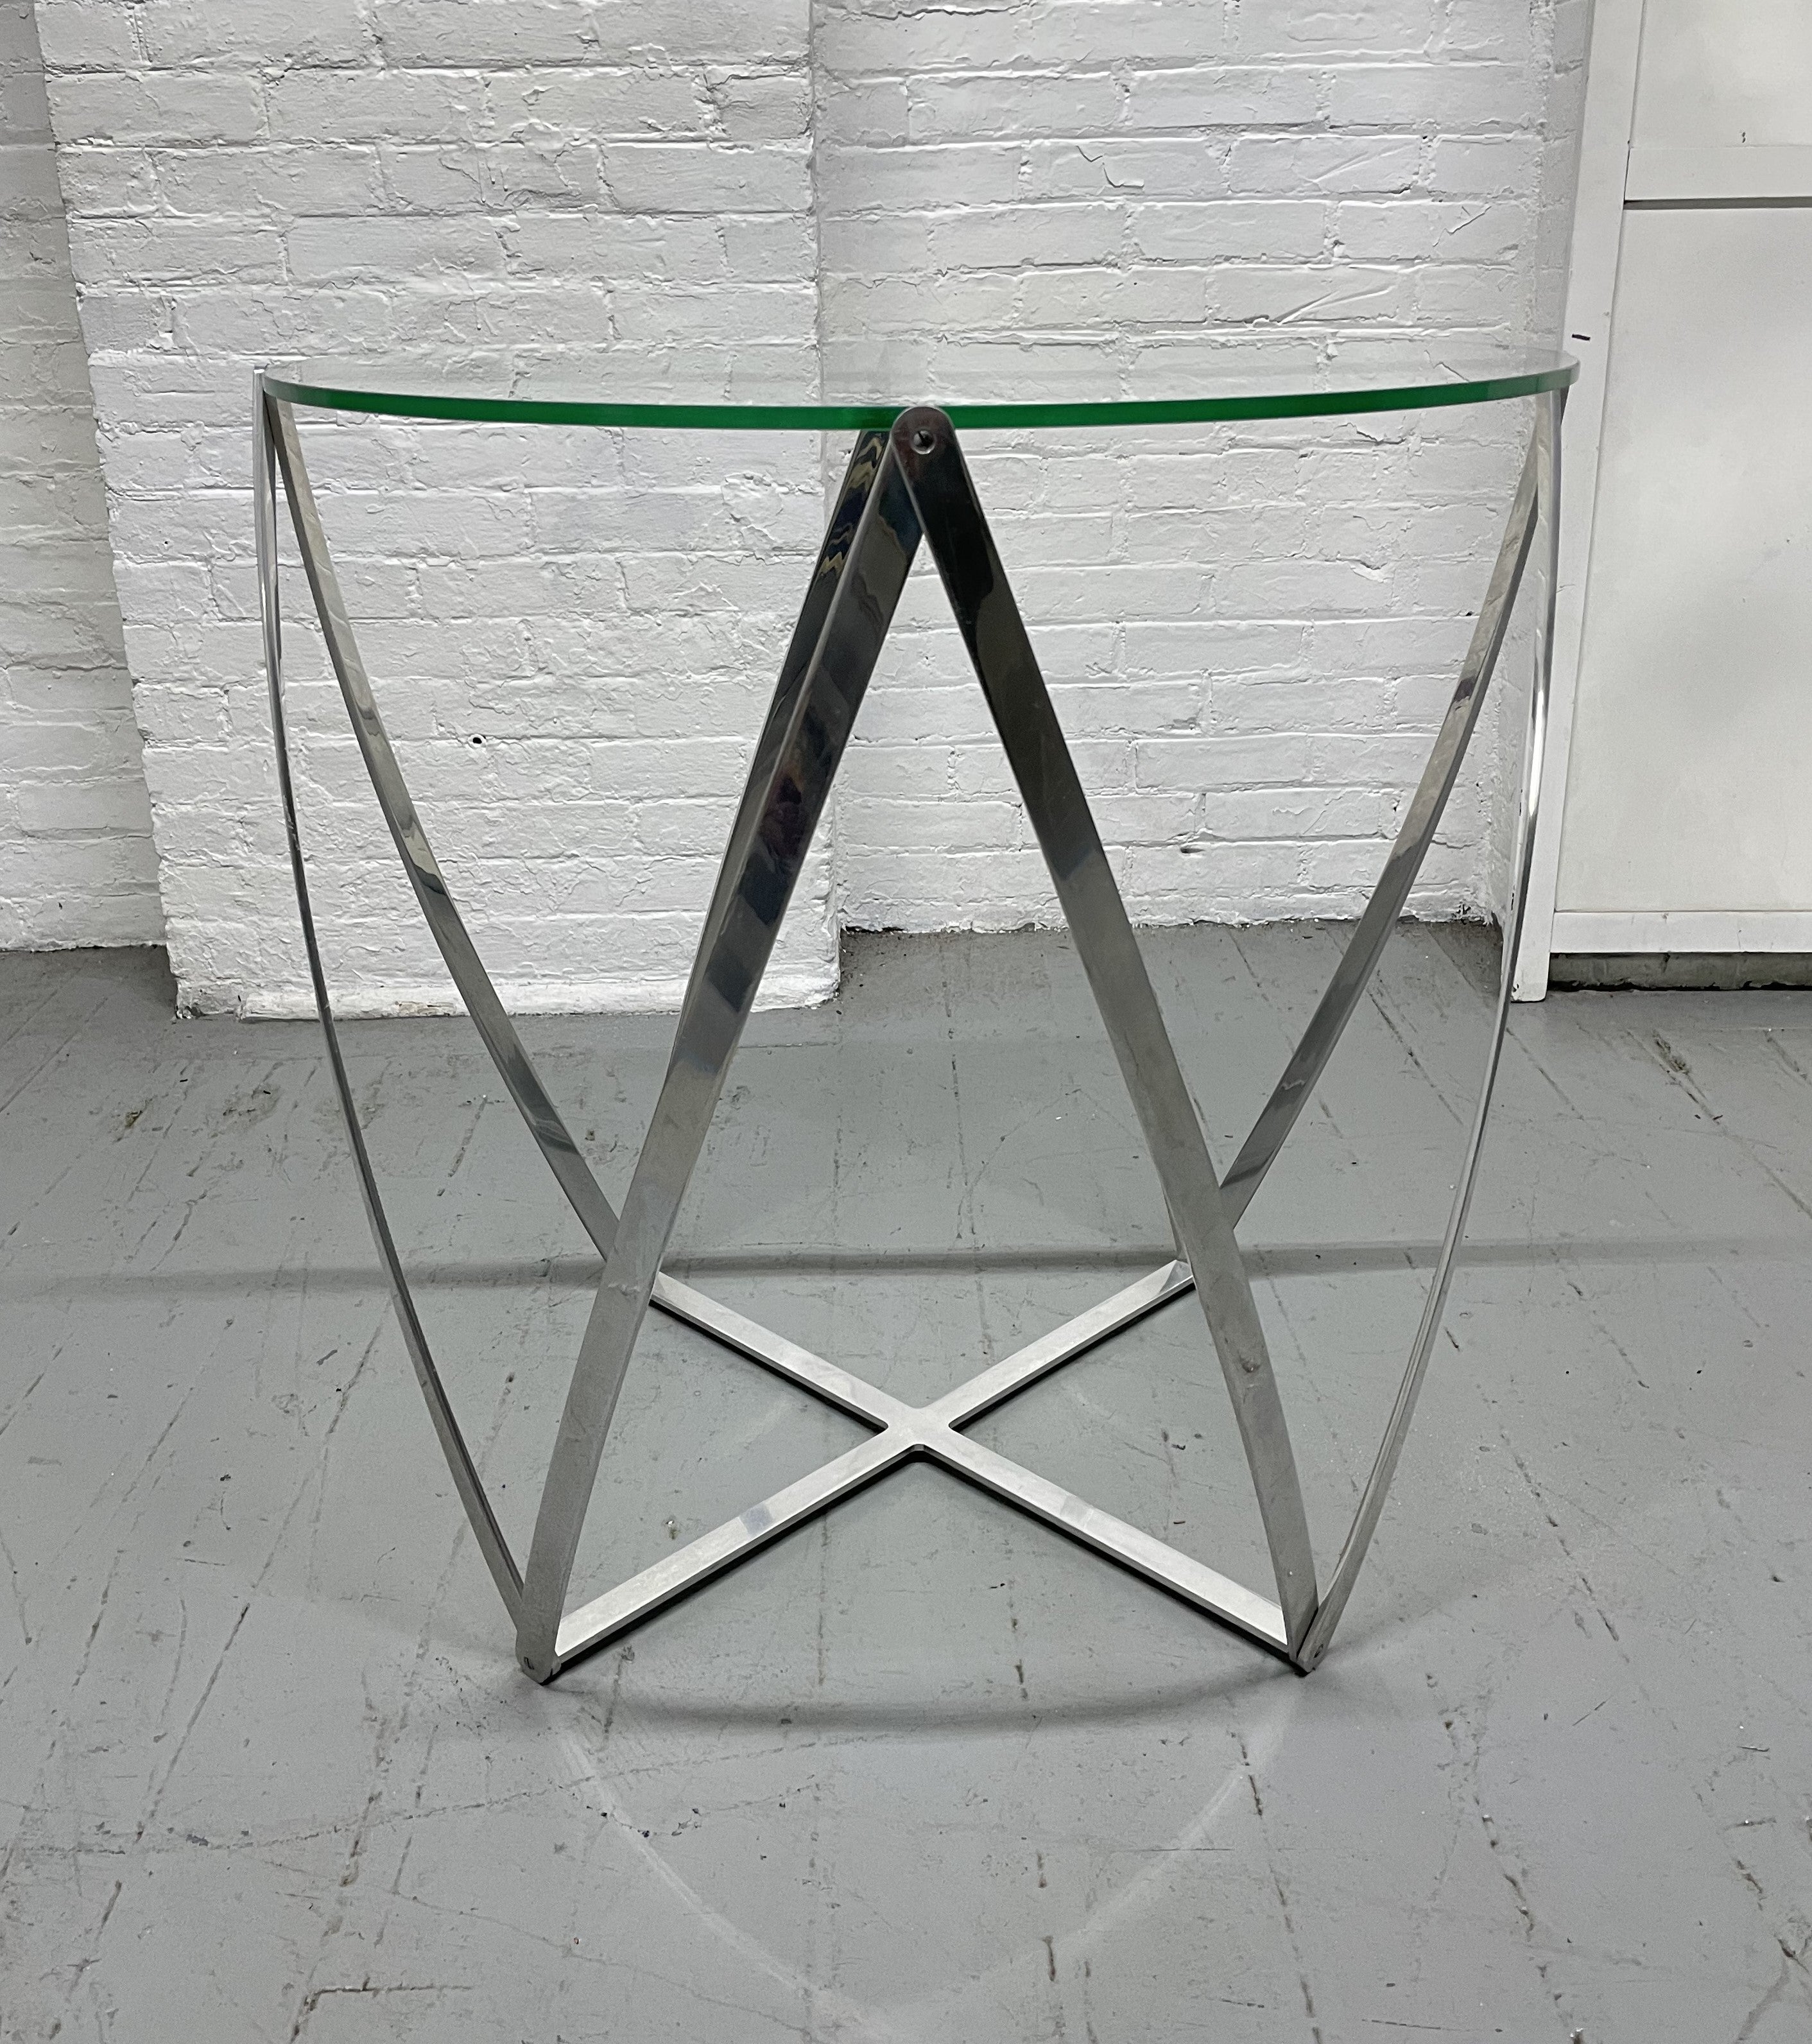 John Vesey Aluminum and Glass Spool Side Table. Polished aluminum and glass top side table. This is the largest version of the John Vesey Spool table.